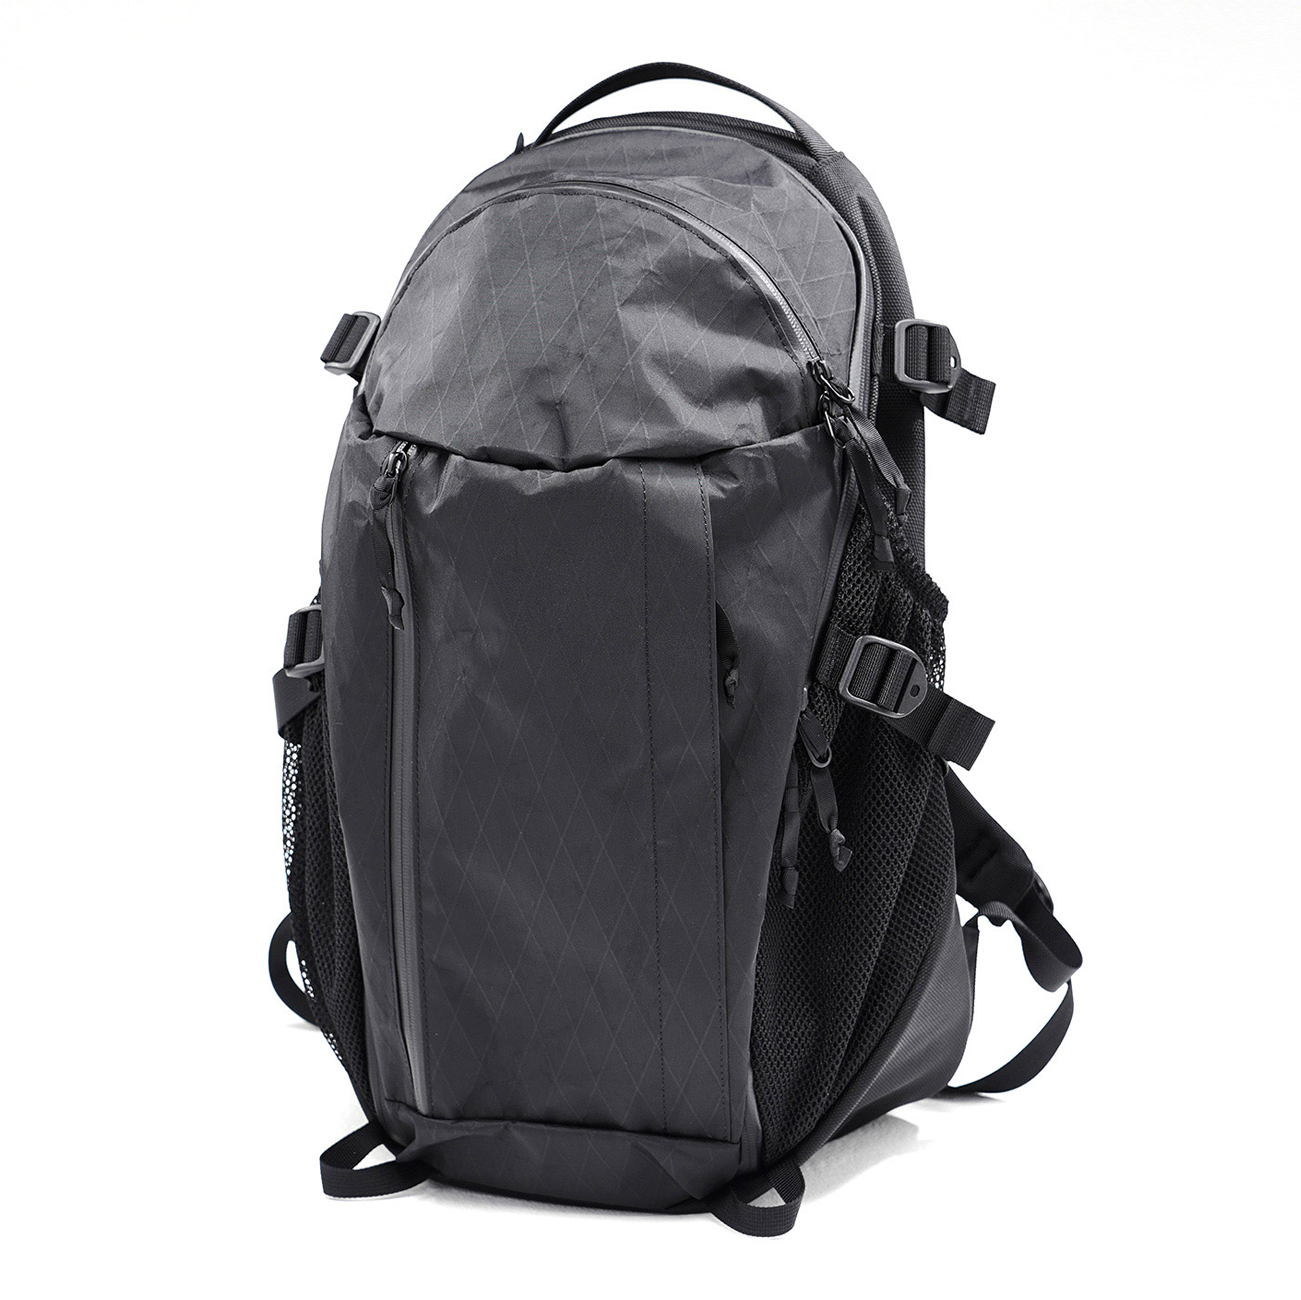 MOUNTAIN ROVER Daypack 22 BK edition – WANDERS*